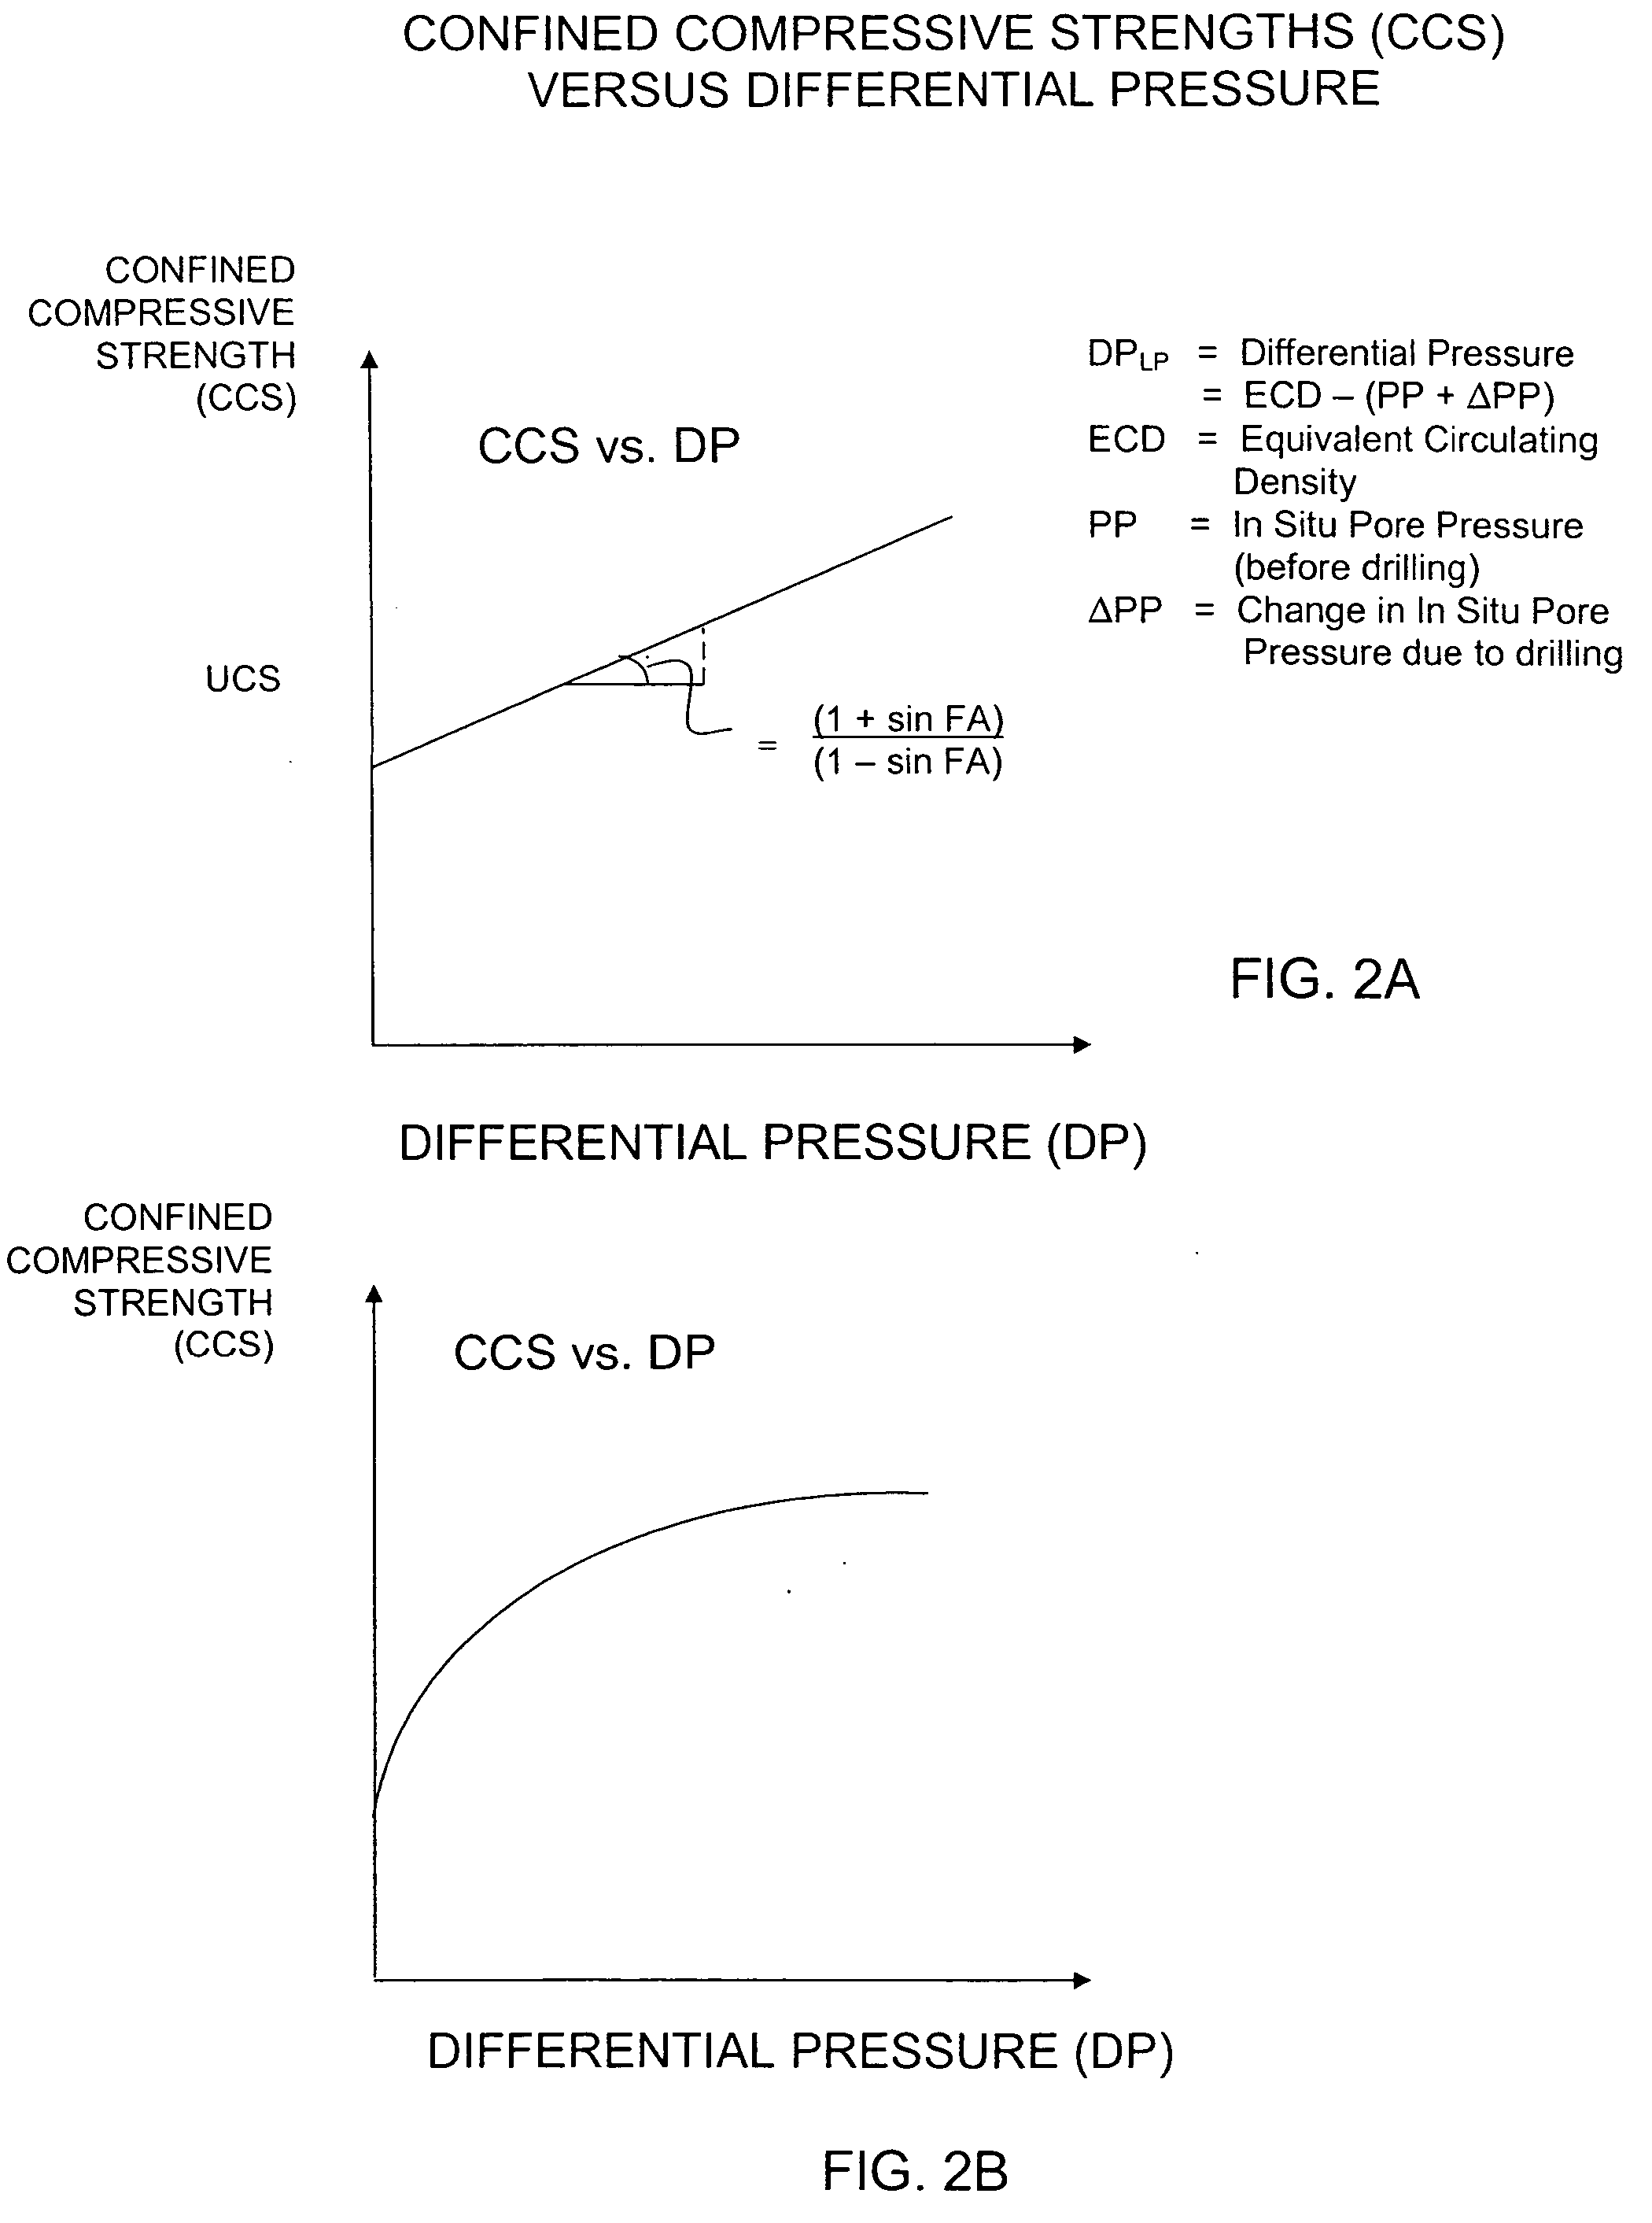 Method for estimating confined compressive strength for rock formations utilizing skempton theory